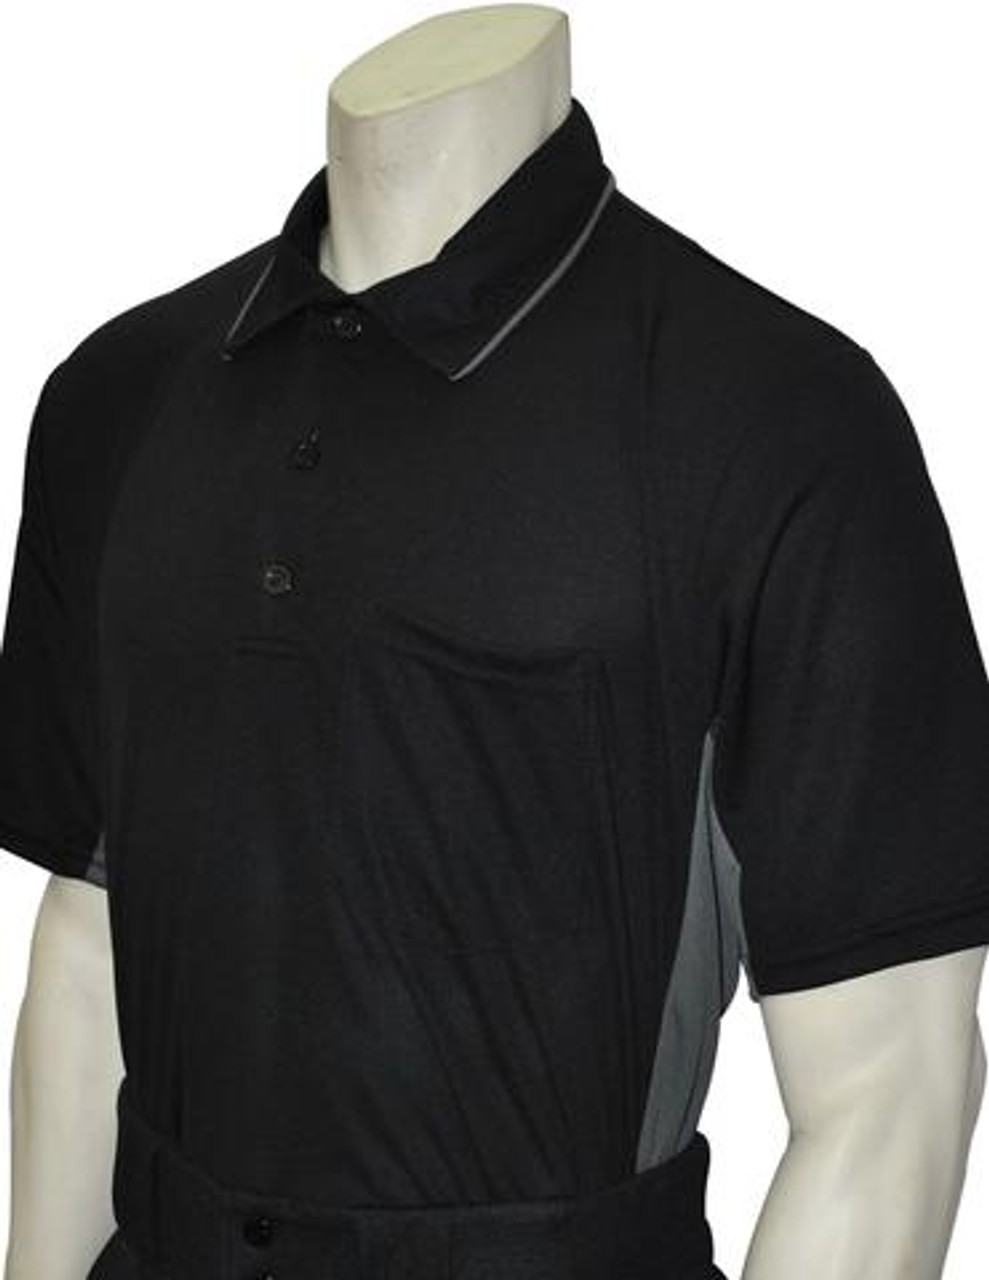 Download MLB Style Black Umpire Shirt with Grey Side Panel | Umpire ...